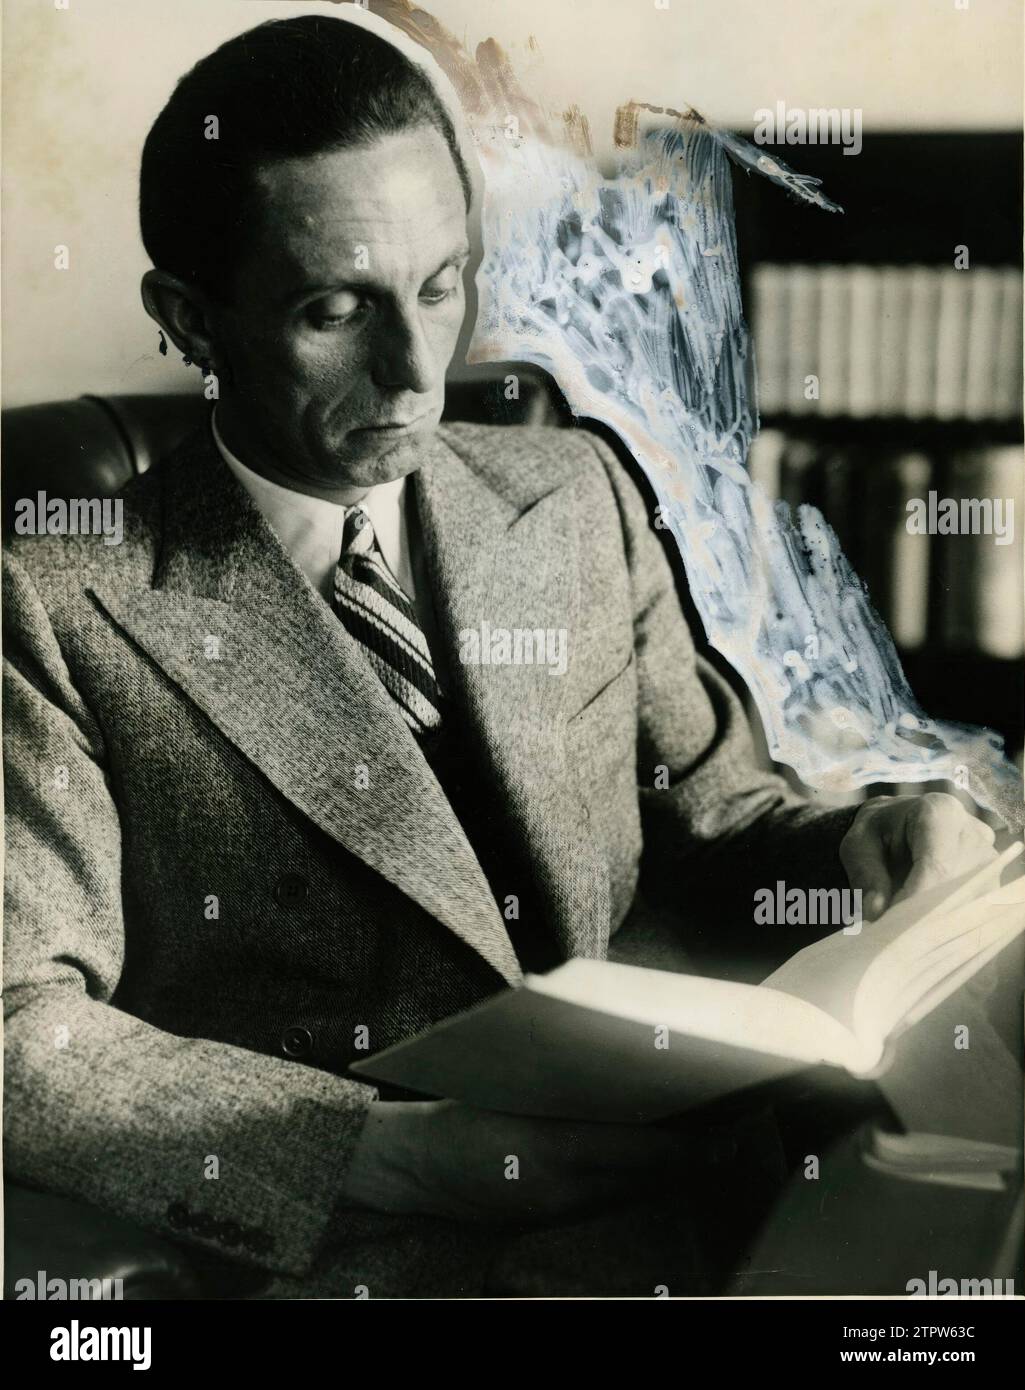 12/31/1934. Dr. Paul Joseph Goebbels, Minister of Propaganda of the Third Reich, one of the Main Figures of Nazi Germany. Credit: Album / Archivo ABC Stock Photo